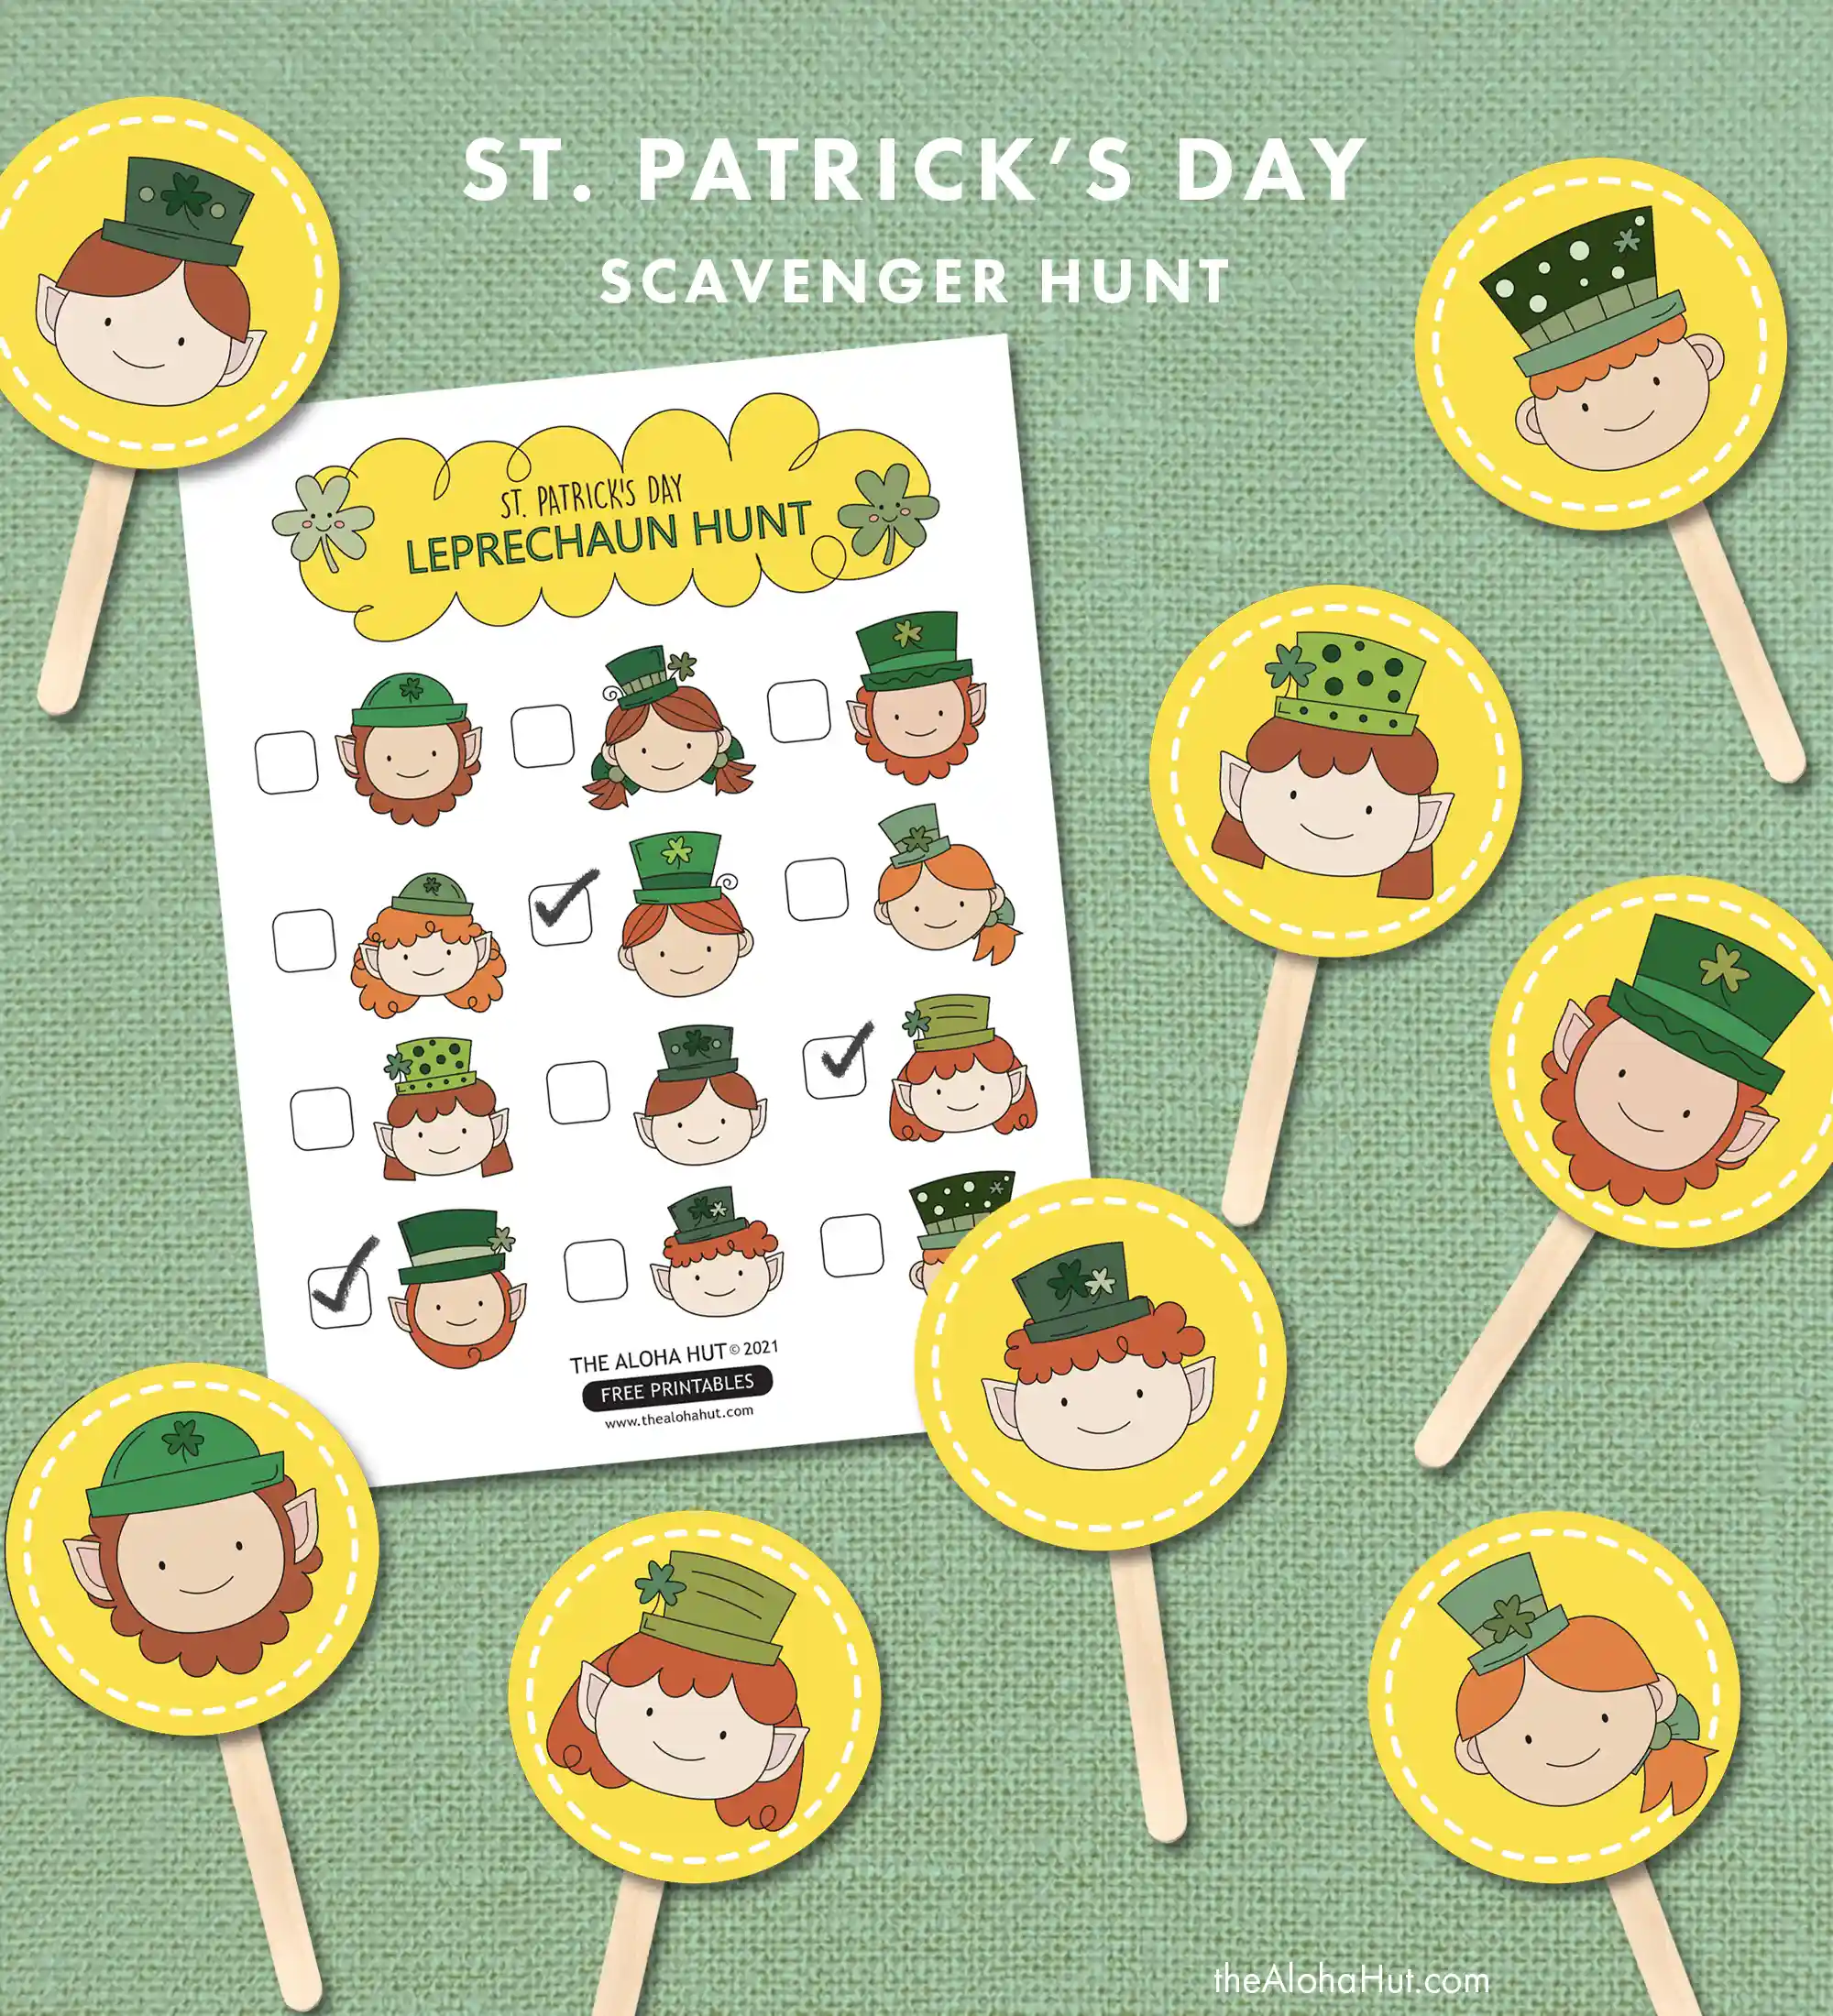 Ideas for how to throw the best St. Patrick's Day party for your kids. Includes printable St. Parick's Day coloring pages, a placemat activity page for your St. Patrick's Day rainbow themed brunch, and printables for a fun St. Patrick's Day themed meal for the kids. Download the printable St. Patrick's Day games and activities to help your plan your next party! Grab the printable Leprechaun scavenger hunt game in our etsy shop.